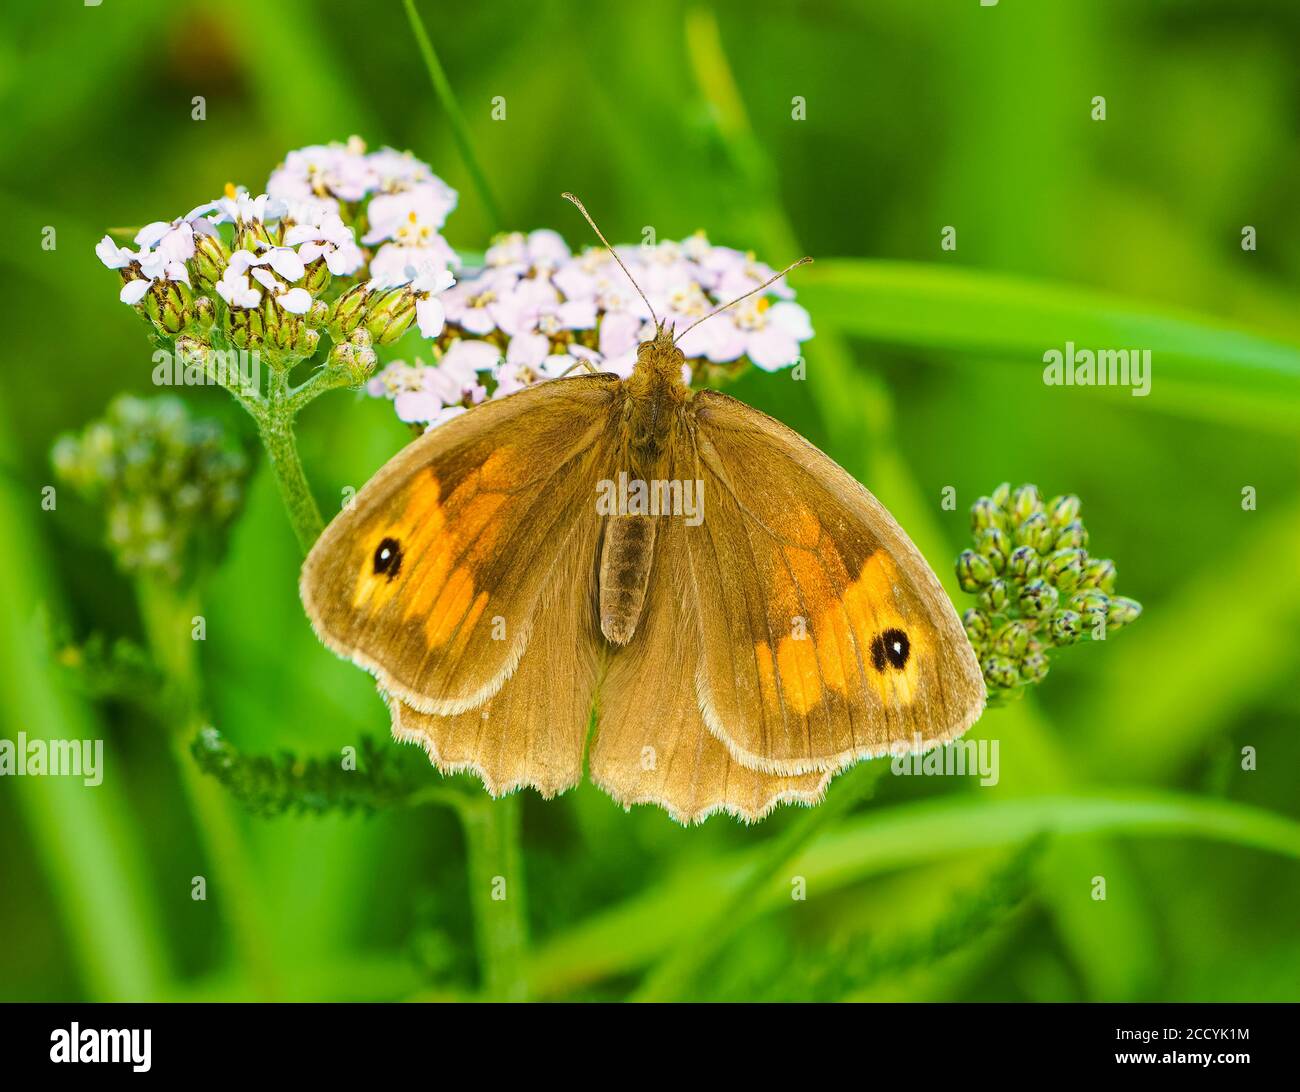 Butterfly on Flower Stock Photo